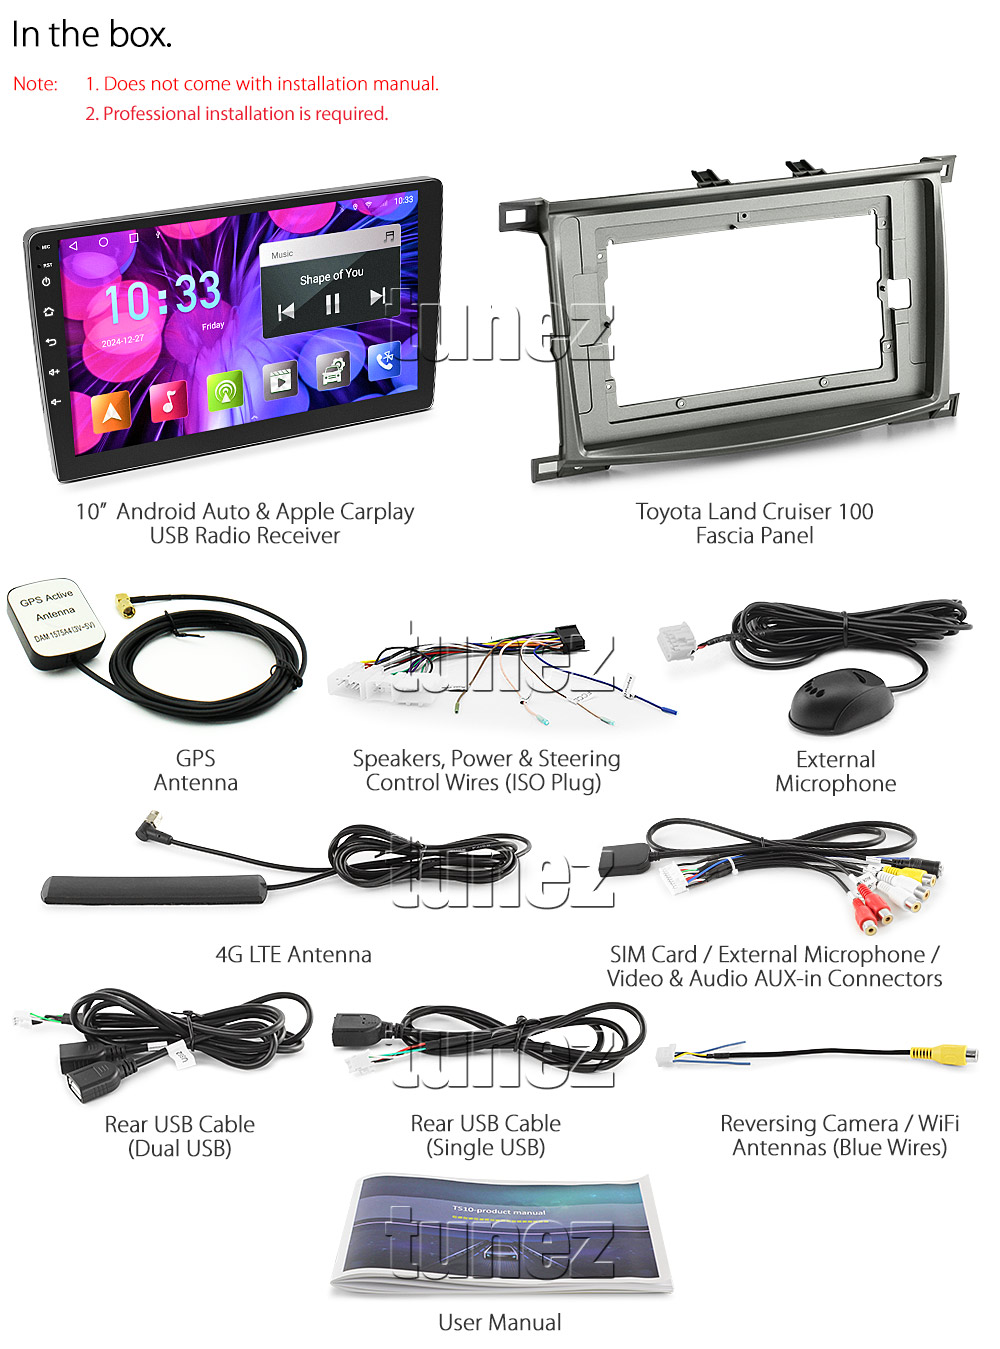 SRRTLC07AND GPS Aftermarket Toyota Land Cruiser Landcruiser 100 Series J100 Post-facelift Facelift Year 2003 2004 2005 2006 2007 Extra Large 10-inch 10 touchscreen Navigation Universal Double DIN Latest Australia UK European Apple CarPlay Android Auto 10 Car USB player radio stereo 4G LTE WiFi head unit details Aftermarket External and Internal Microphone Bluetooth Europe Sat Nav Navi Plug and Play ISO Plug Wiring Harness Matching Fascia Kit Facia Free Reversing Camera Album Art ID3 Tag RMVB MP3 MP4 AVI MKV Full High Definition FHD 1080p DAB+ Digital Radio DAB + Connects2 CTSTY008.2 CTSTY00C CTSTY00CAMP CTSTY013.2